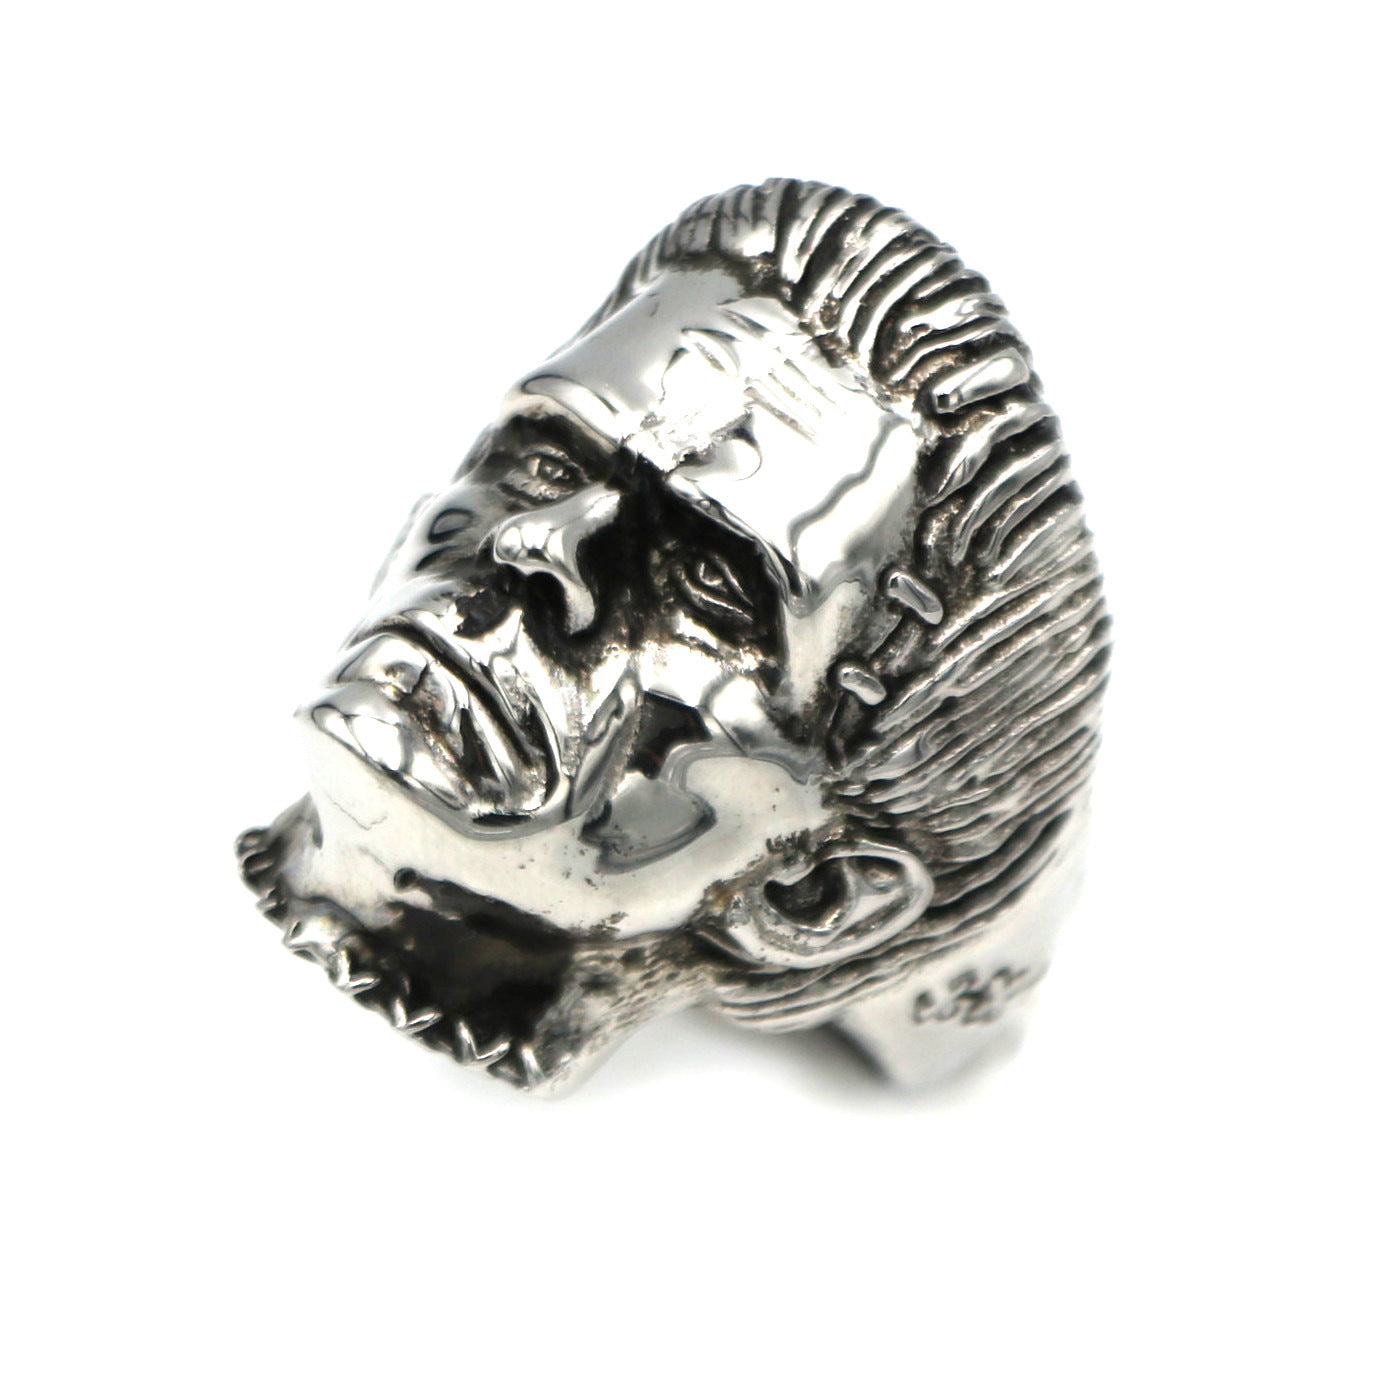 A silver Science Fiction Victor Frankenstein Rings Punk Horror Scientist Stainless Steel Skull Ring Men's Biker Jewelry with a frankenstein head on it from Maramalive™.